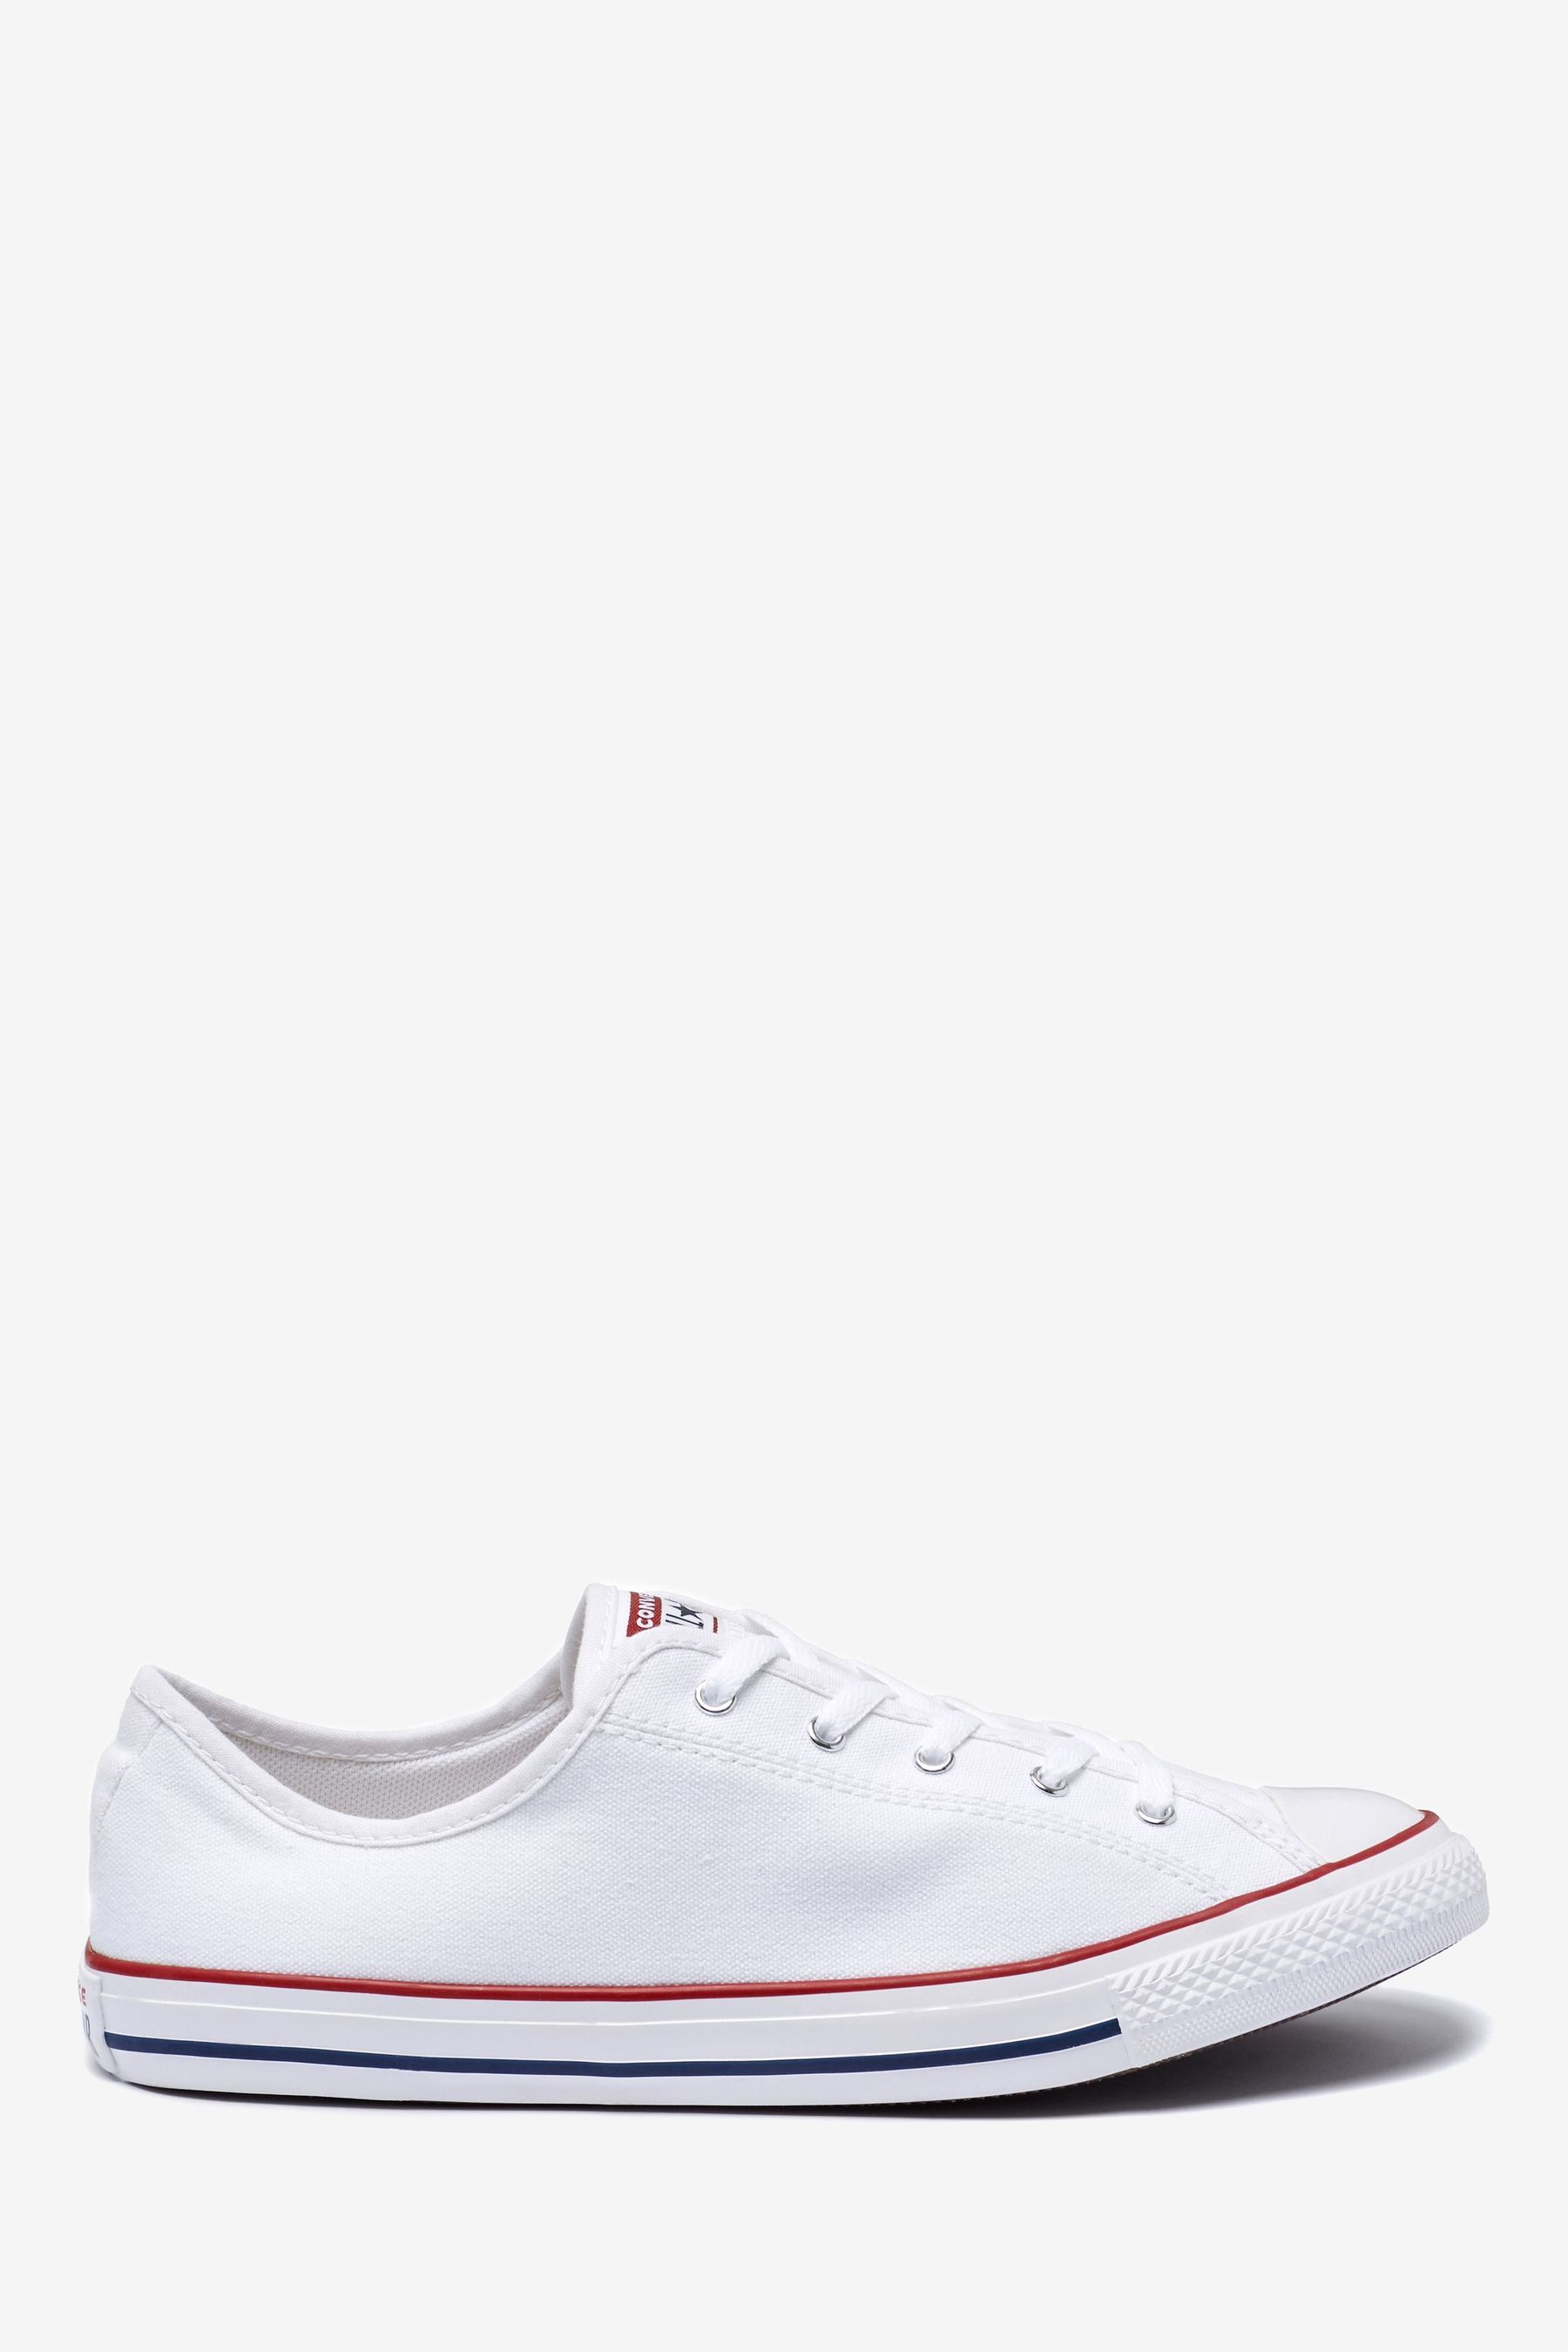 Buy Converse White Dainty Trainers from the Next UK online shop